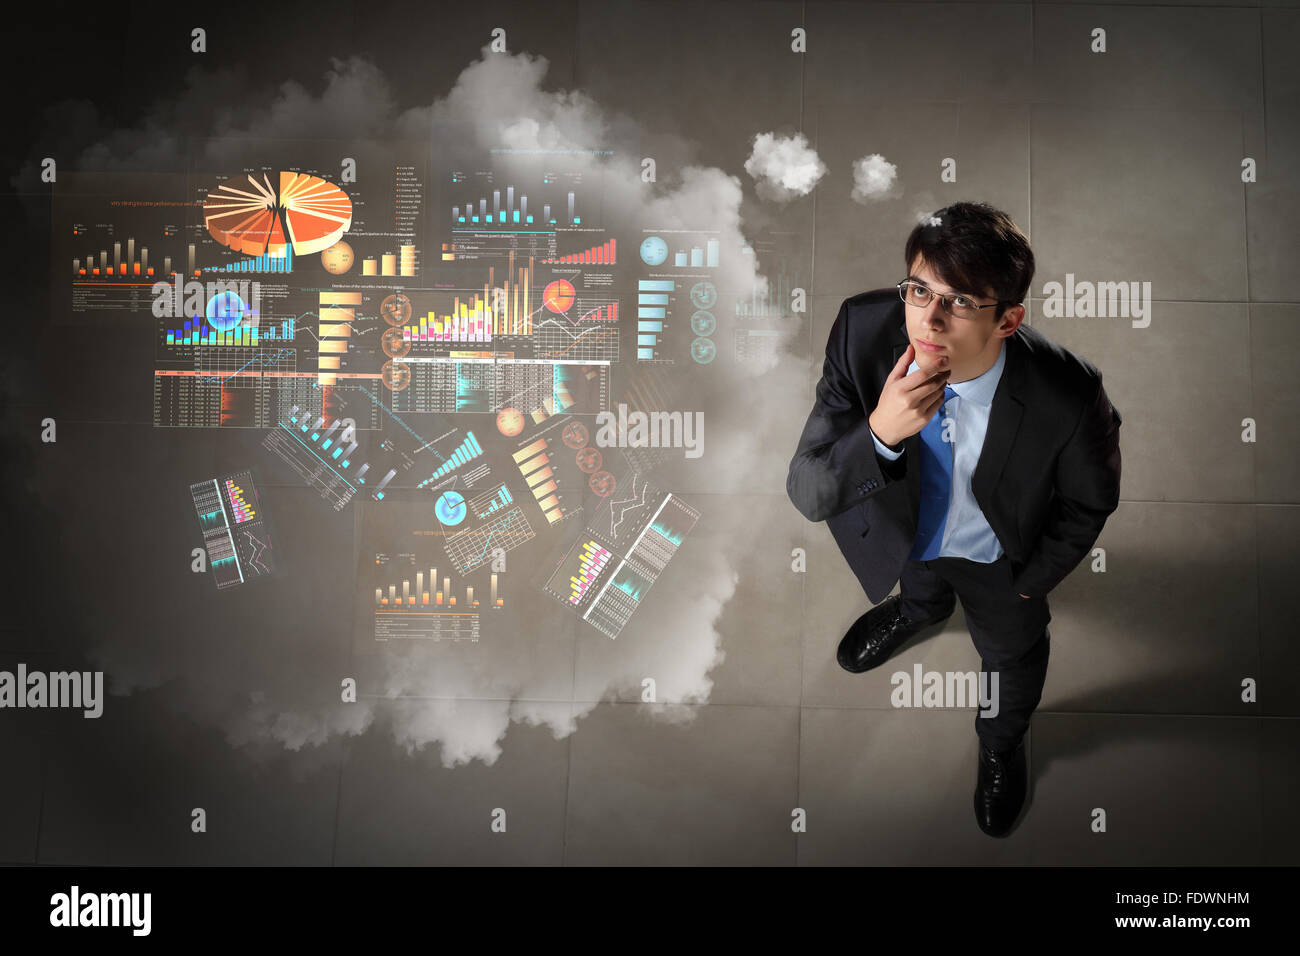 Top view of young businessman making decision diagram in air Stock Photo